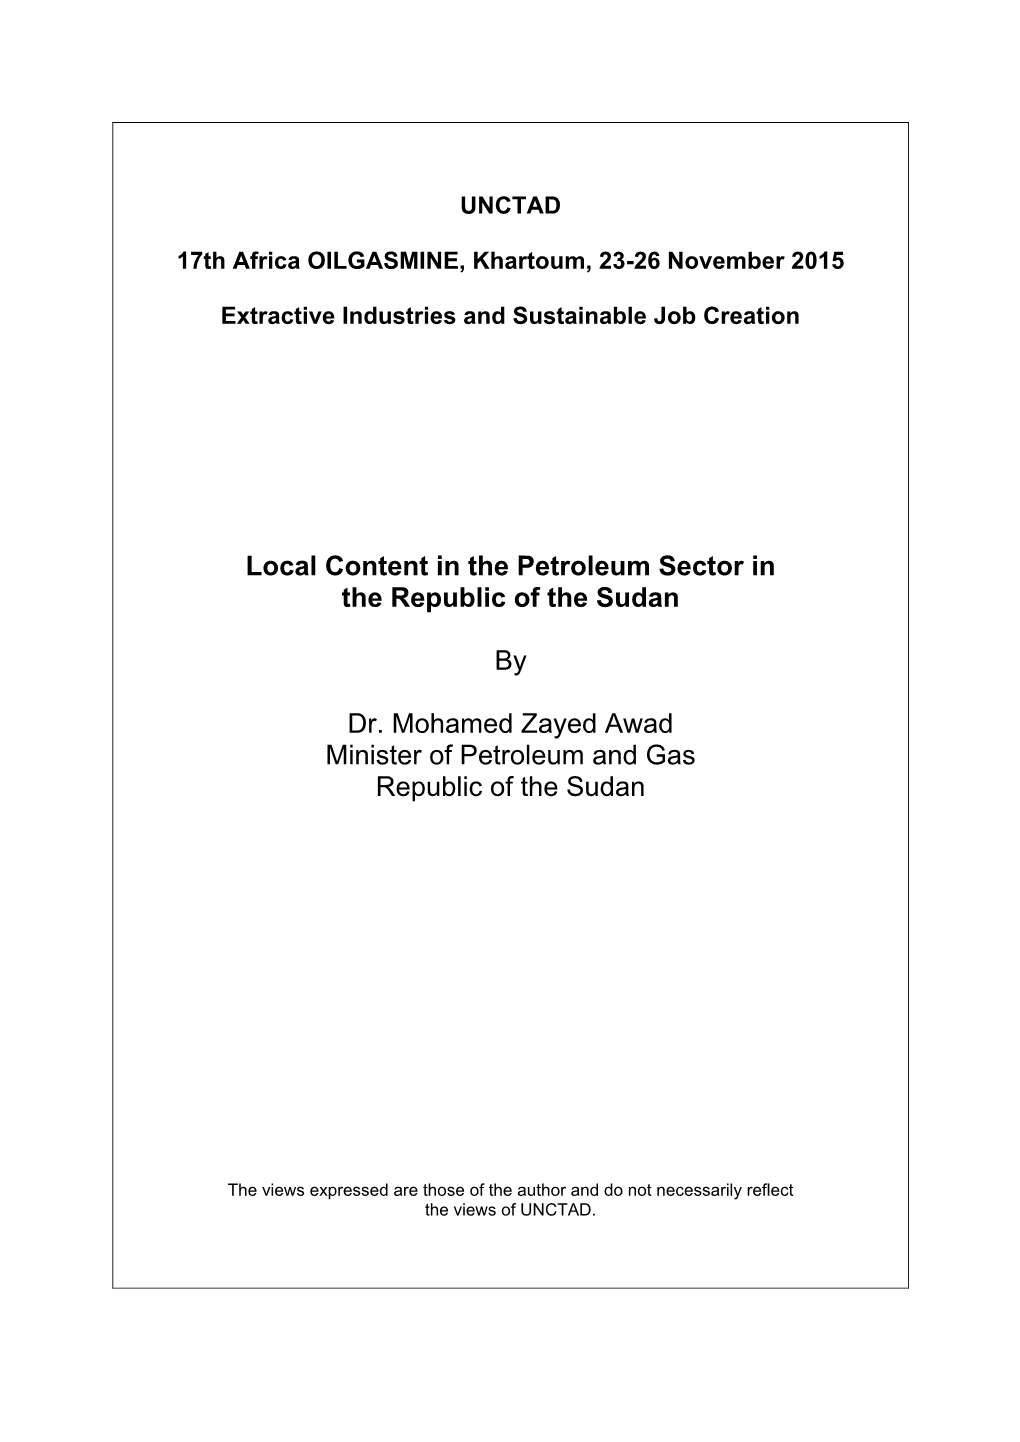 Local Content in the Petroleum Sector in the Republic of the Sudan